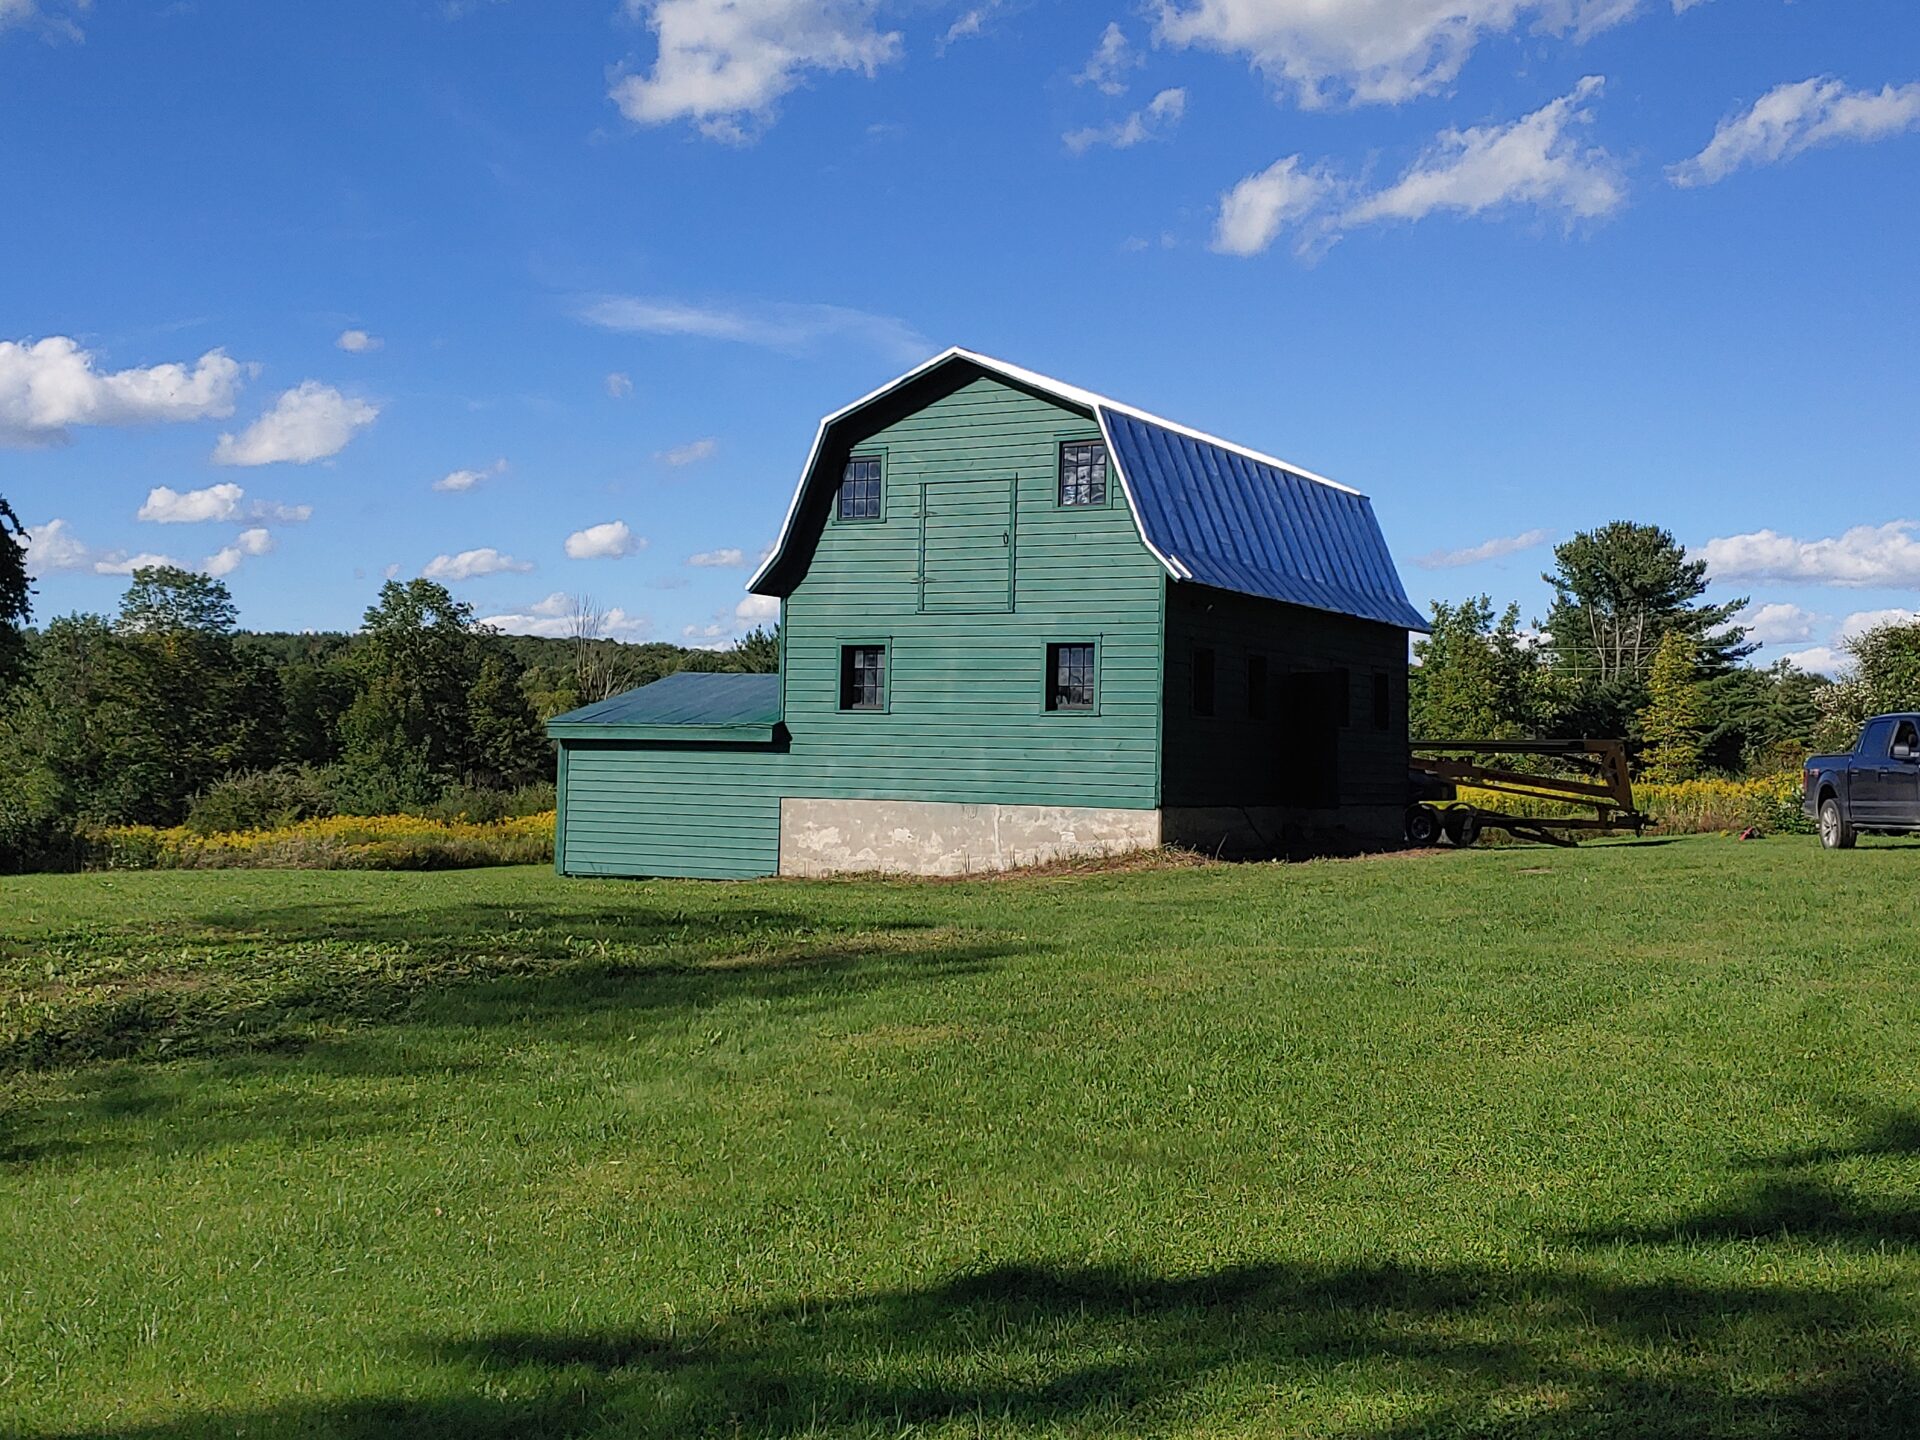 A green barn sitting in the middle of a field.